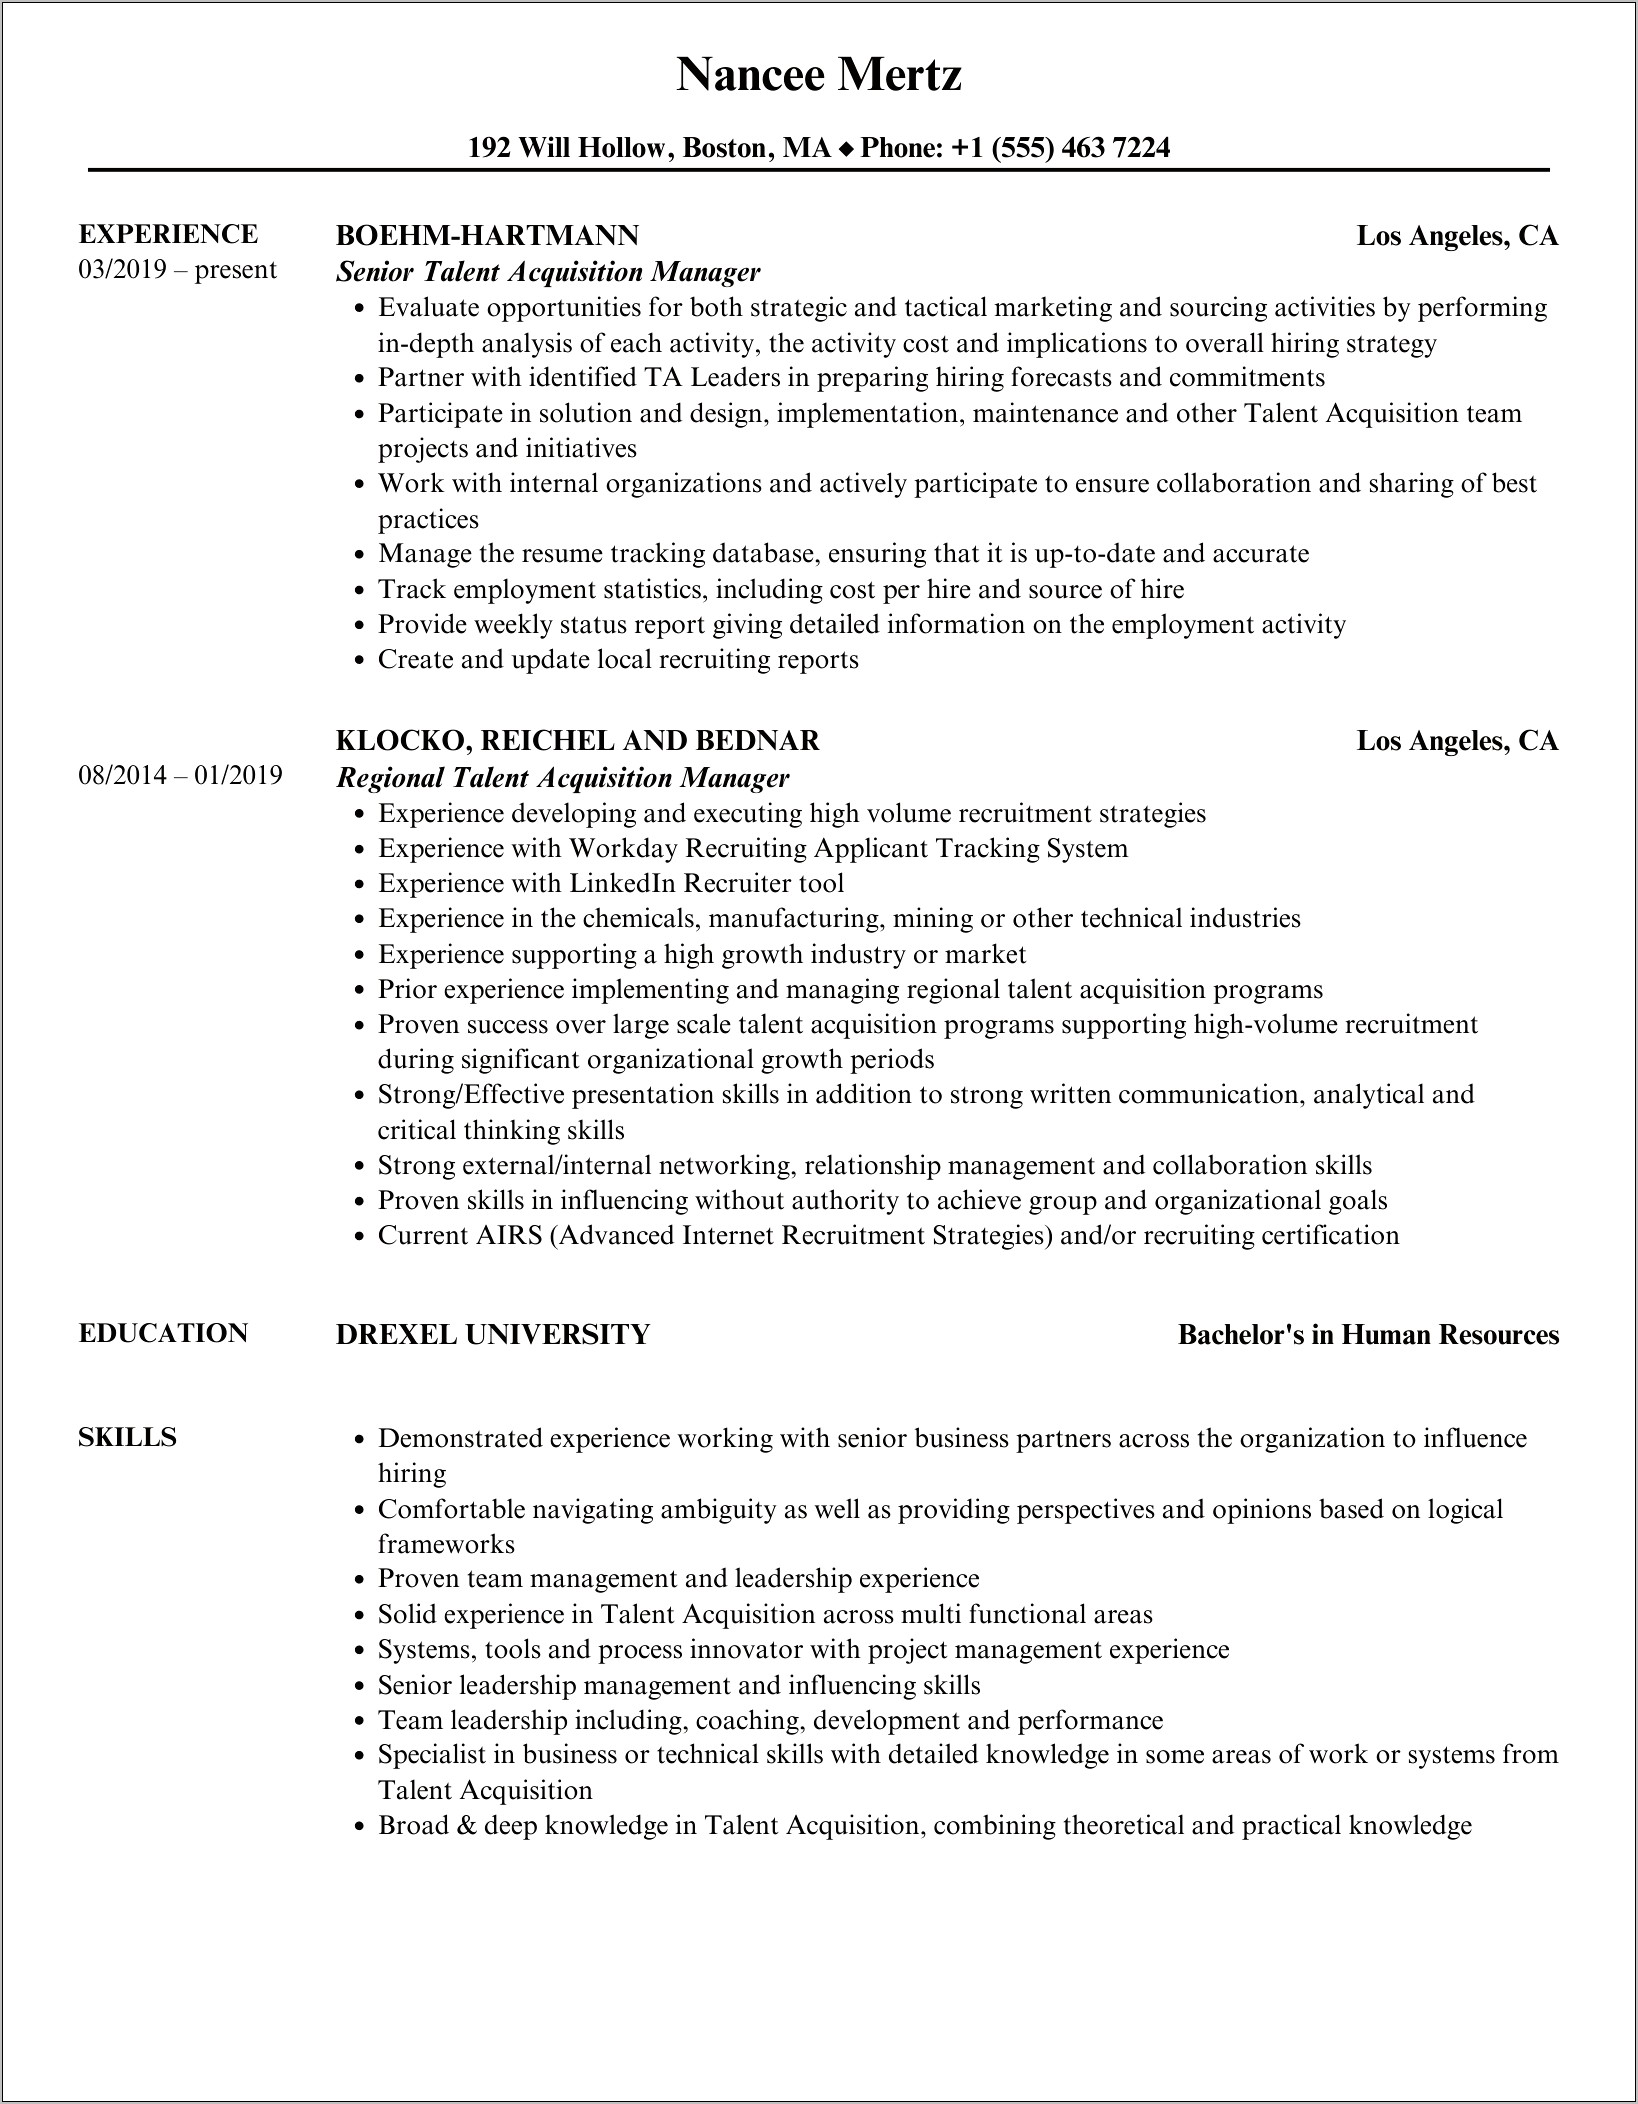 Resumes For Talent Acquisition Managers